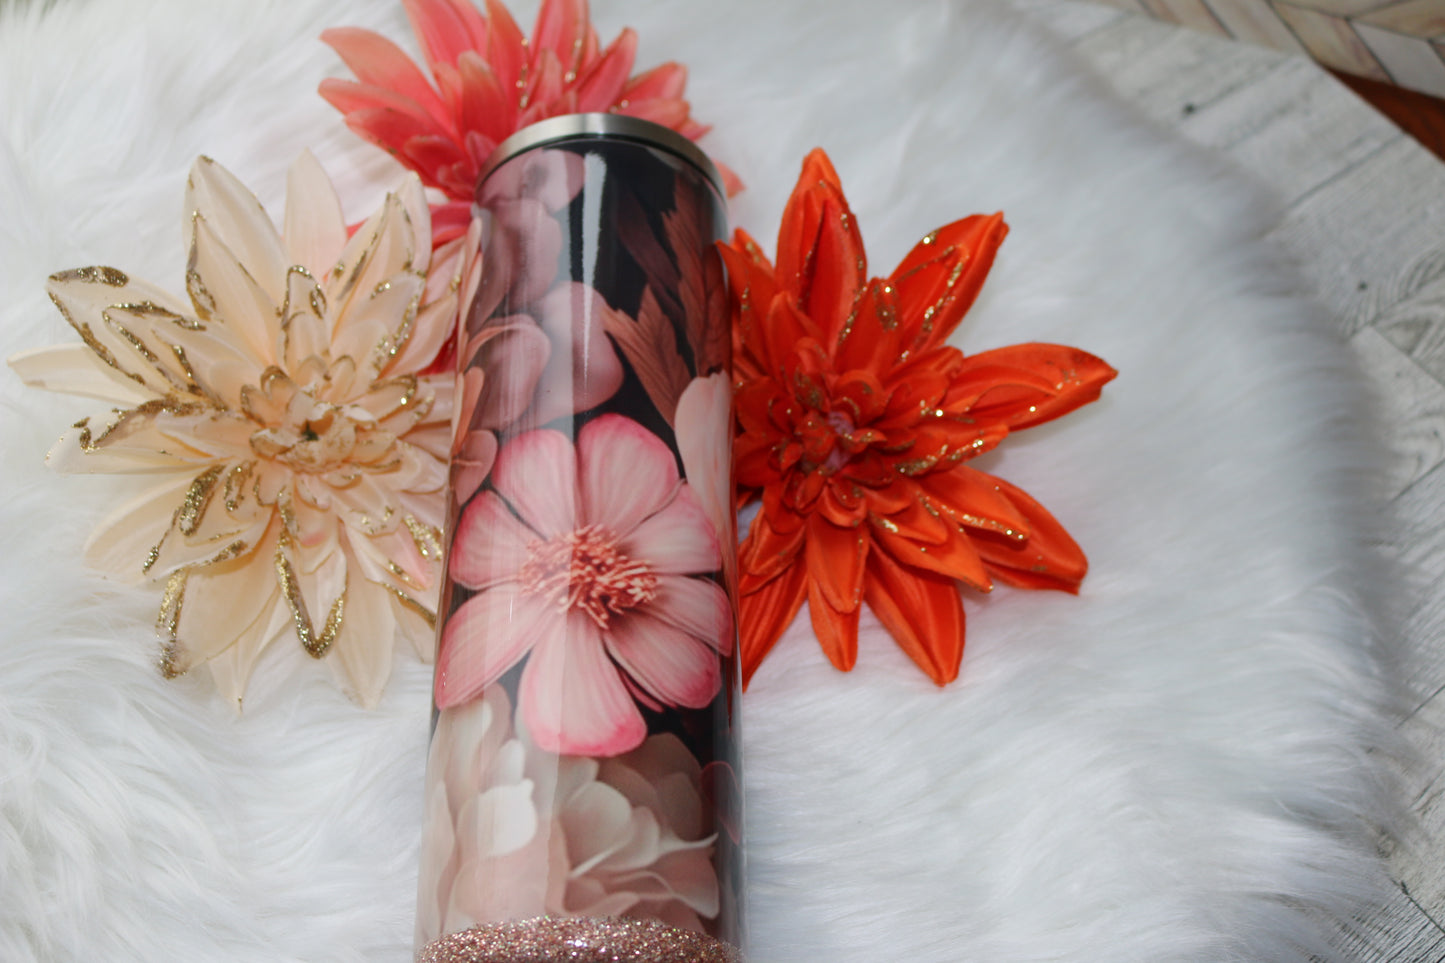 30 oz stainless screw- top Pink floral" Stainless Steal Tumbler